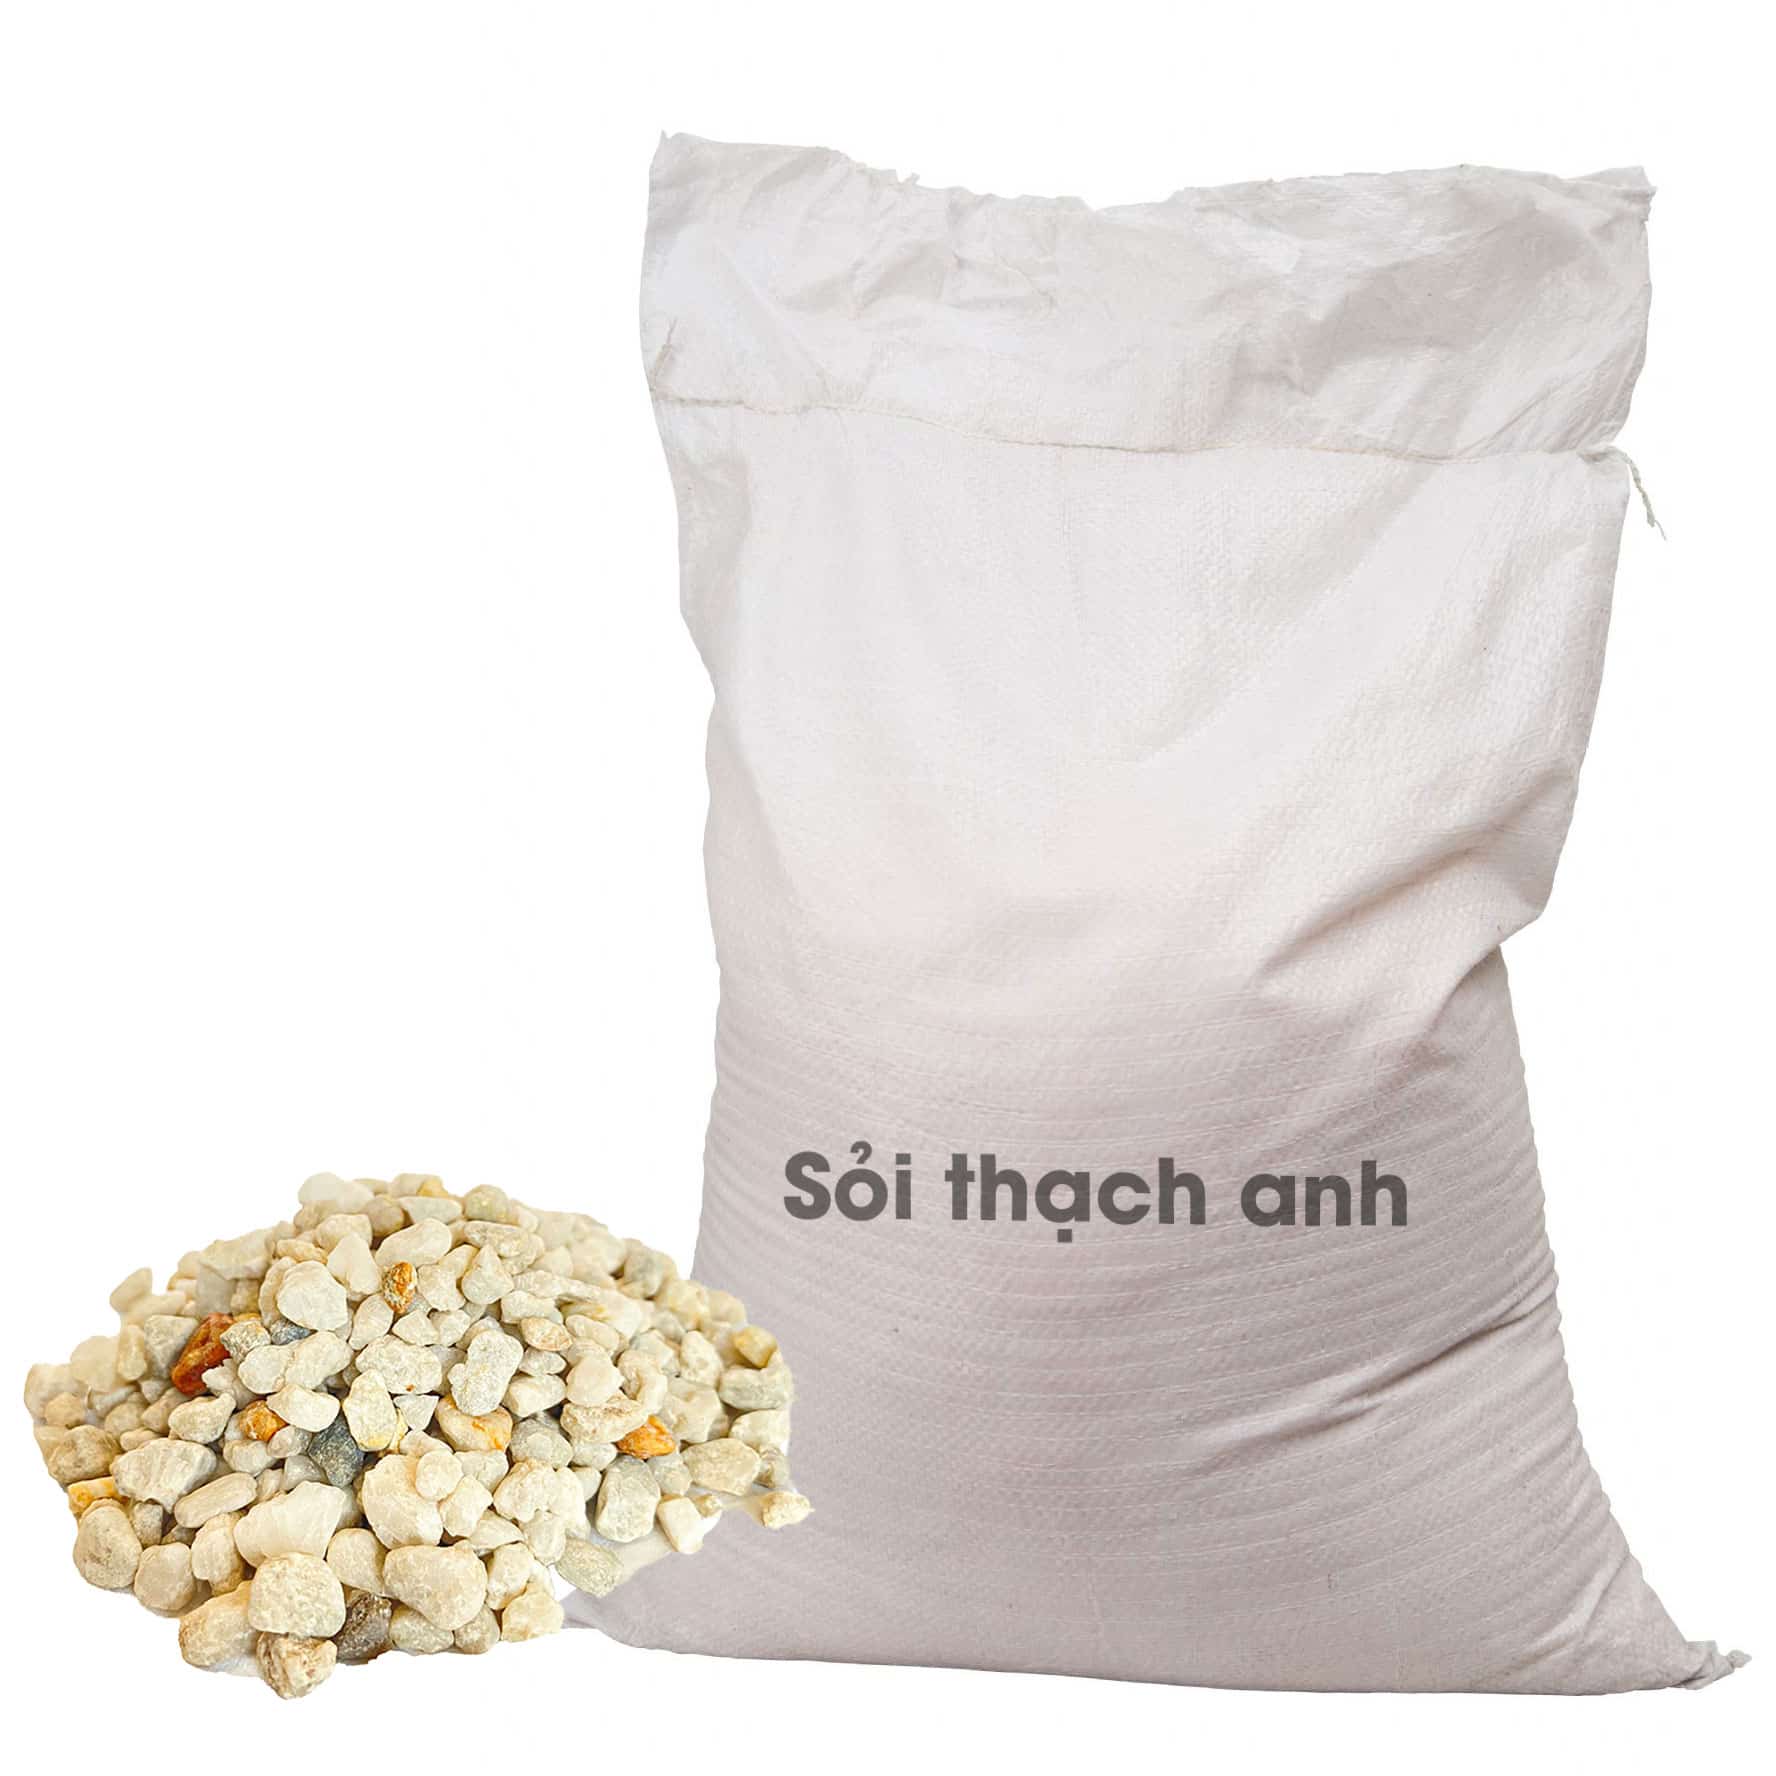 soi-thanh-anh-loc-nuoc